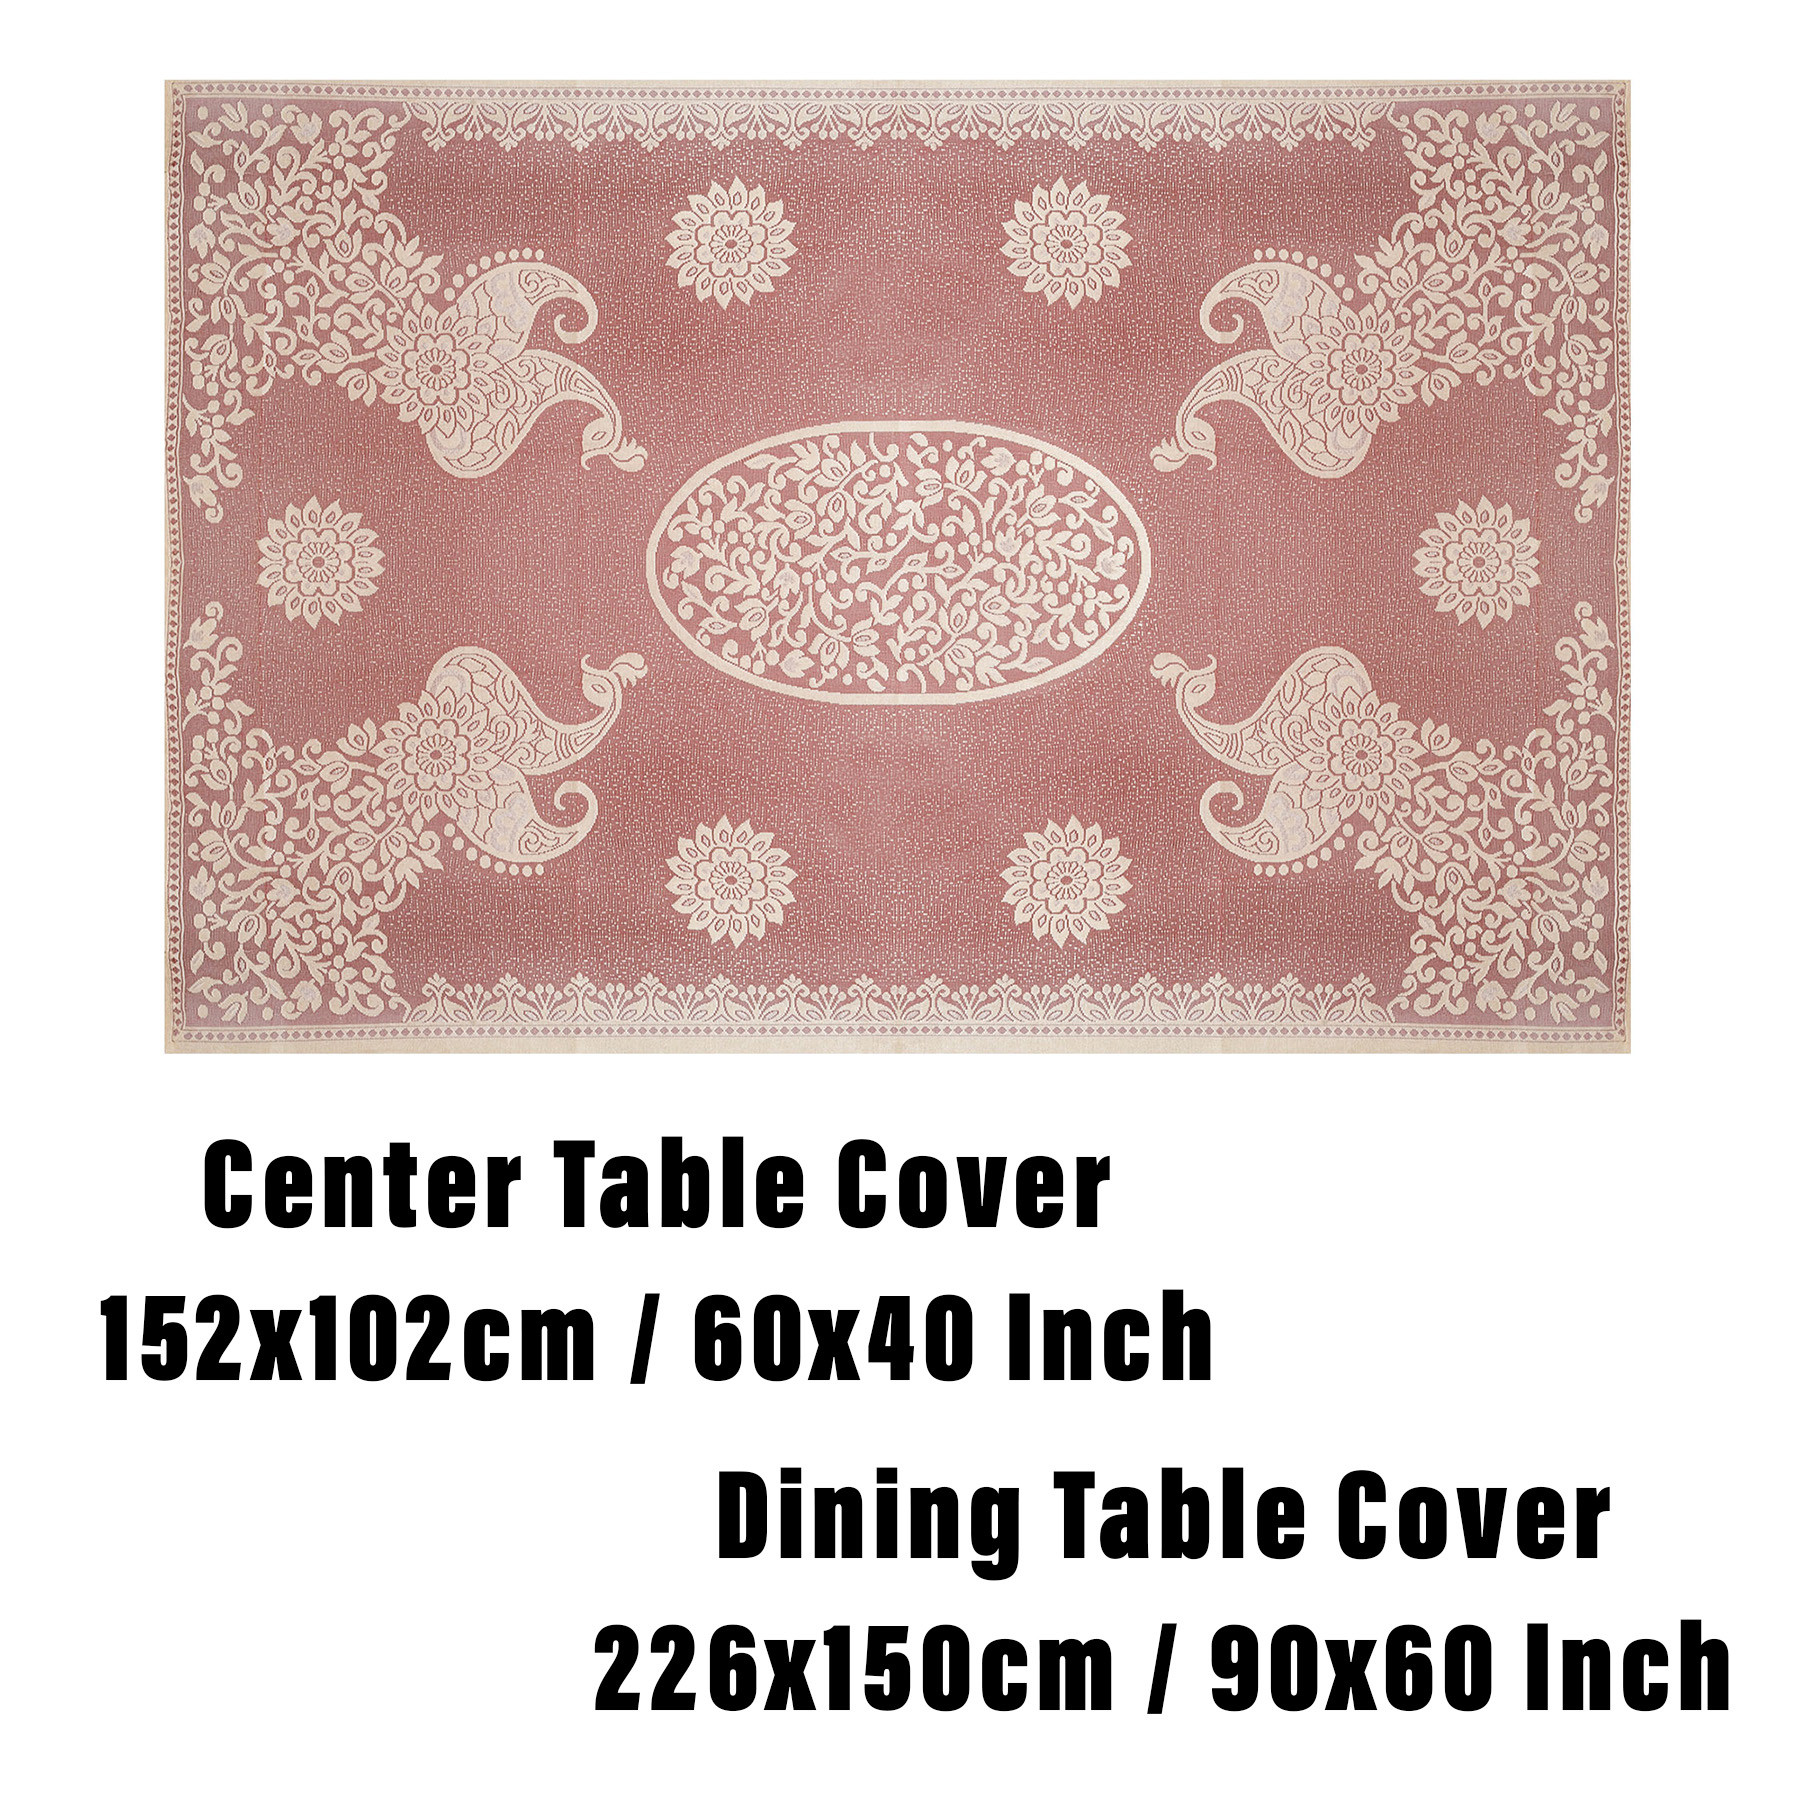 Kuber Industries Center & Dining Table Cover Set | Center & Dining Table Combo Set | Table Cover for Dining & Center | Table Protector Cover | Peacock Table Cover | Maroon